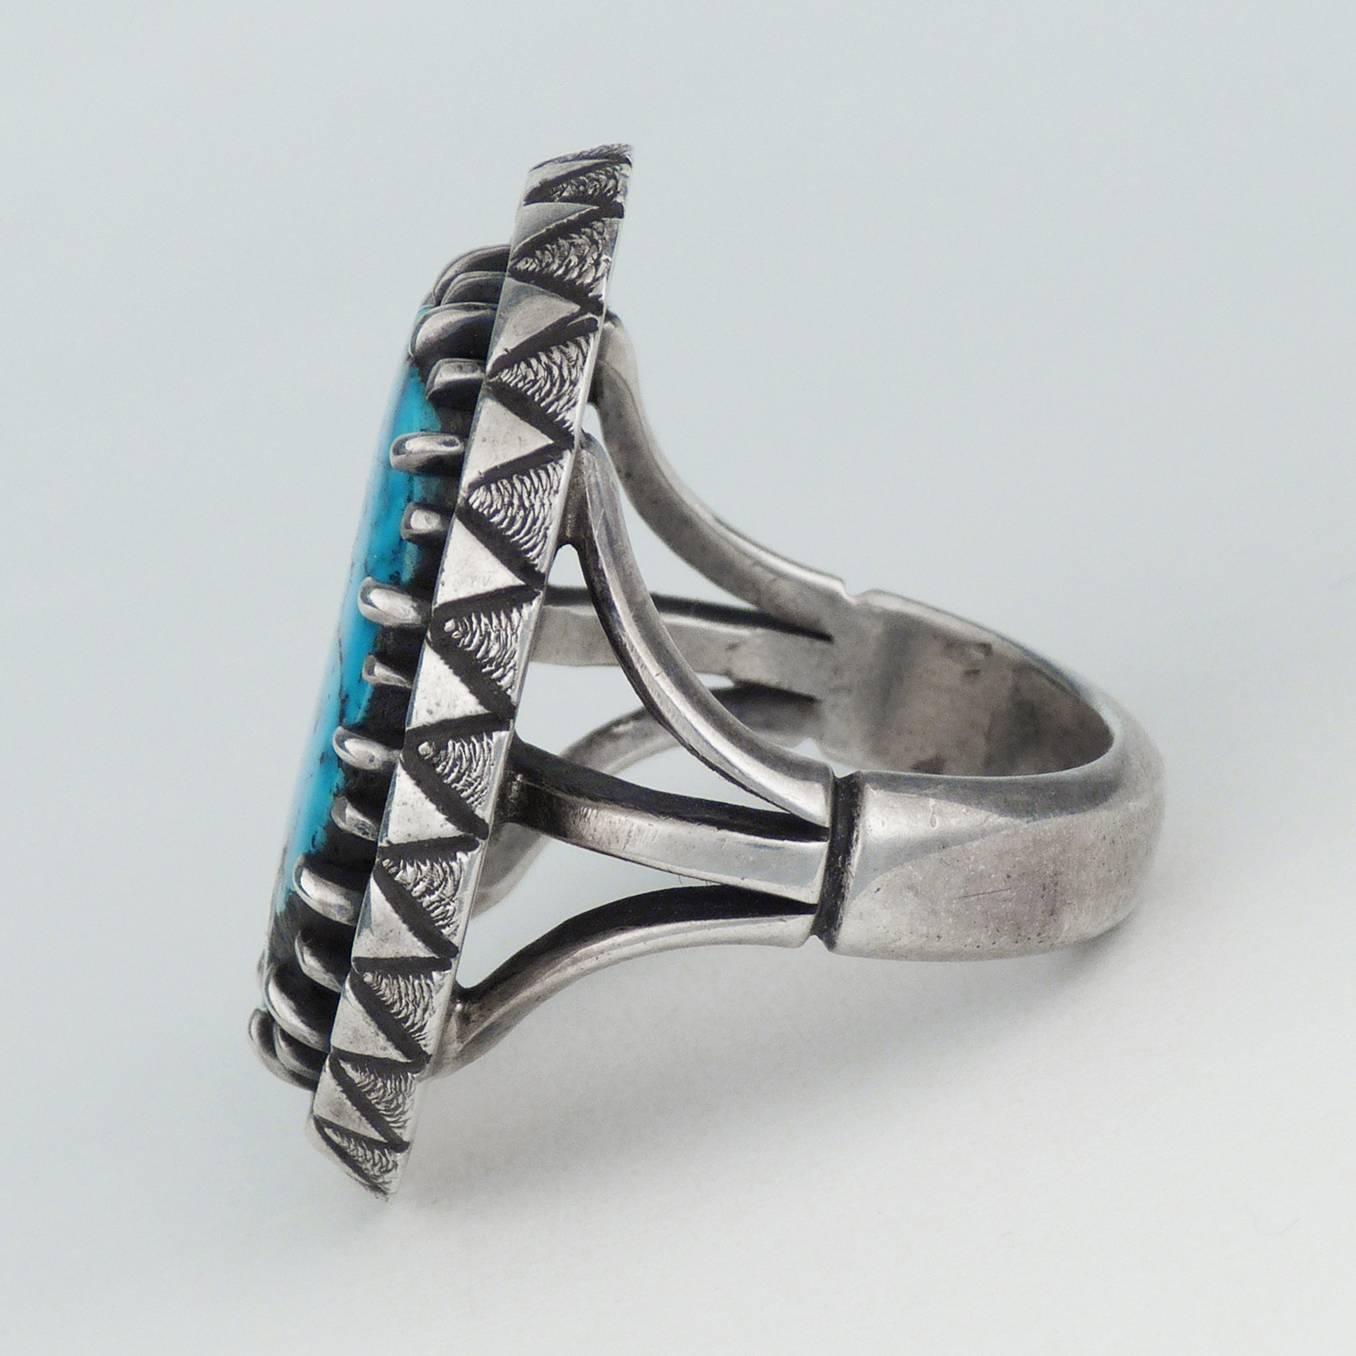 Navajo Vintage Turquoise Ring by Kenneth Begay, circa 1960